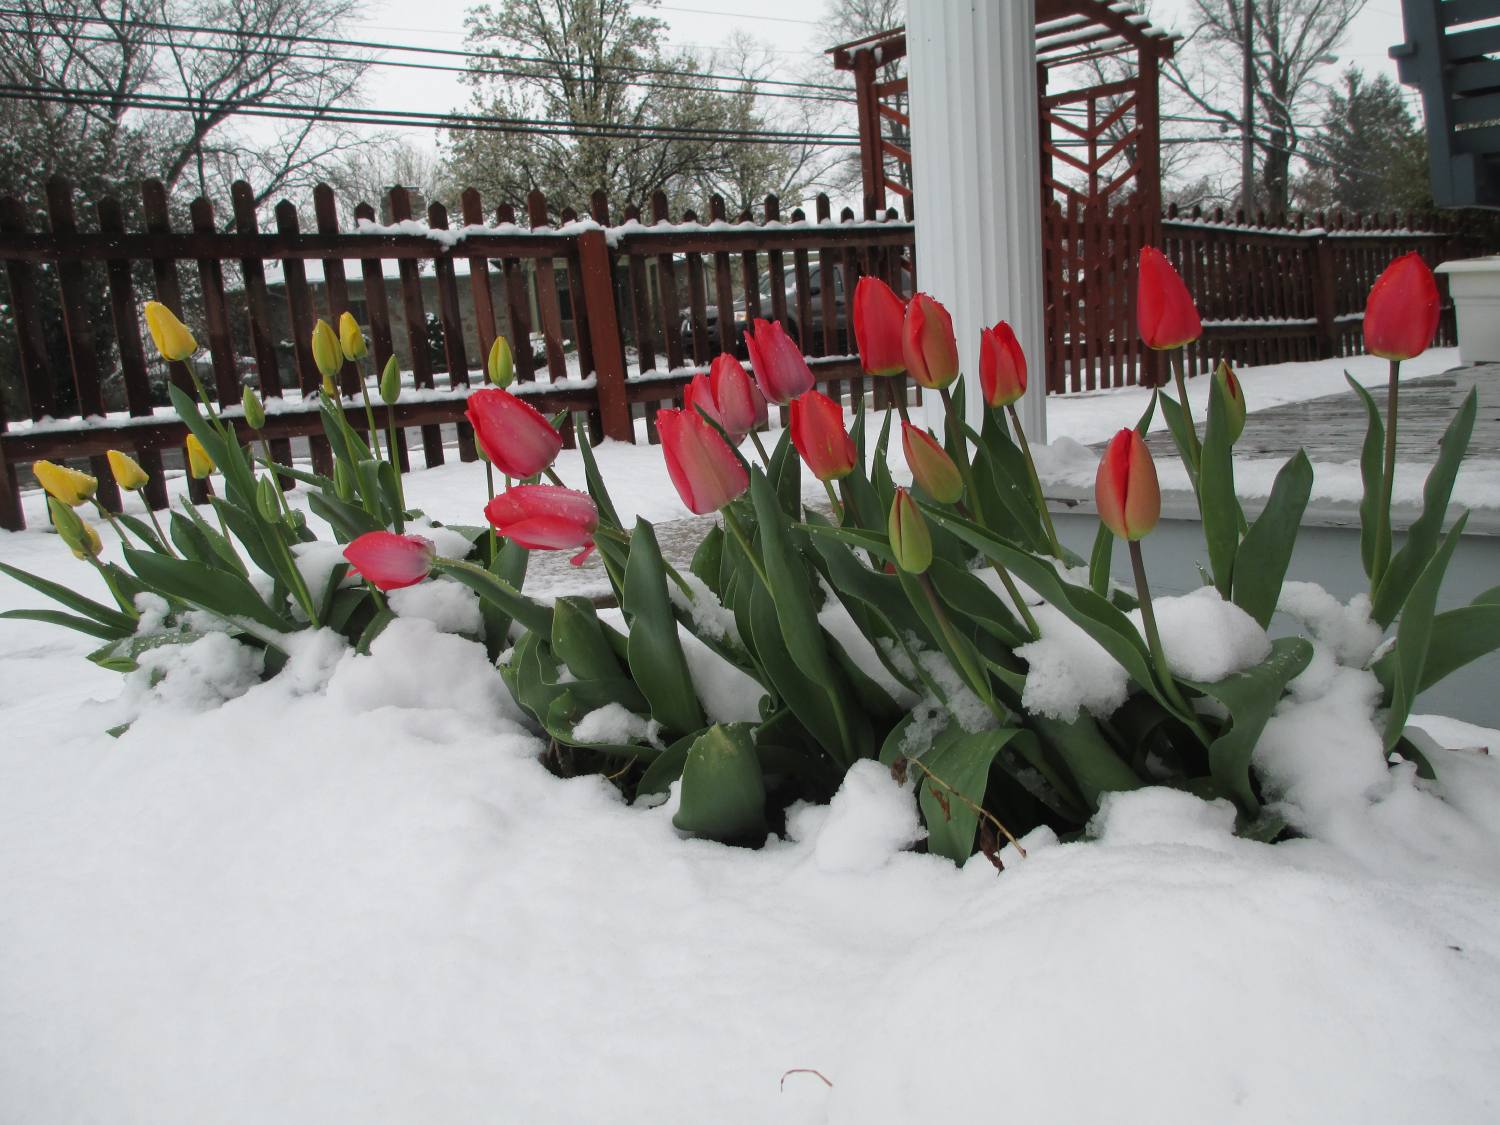 Snow and tulips